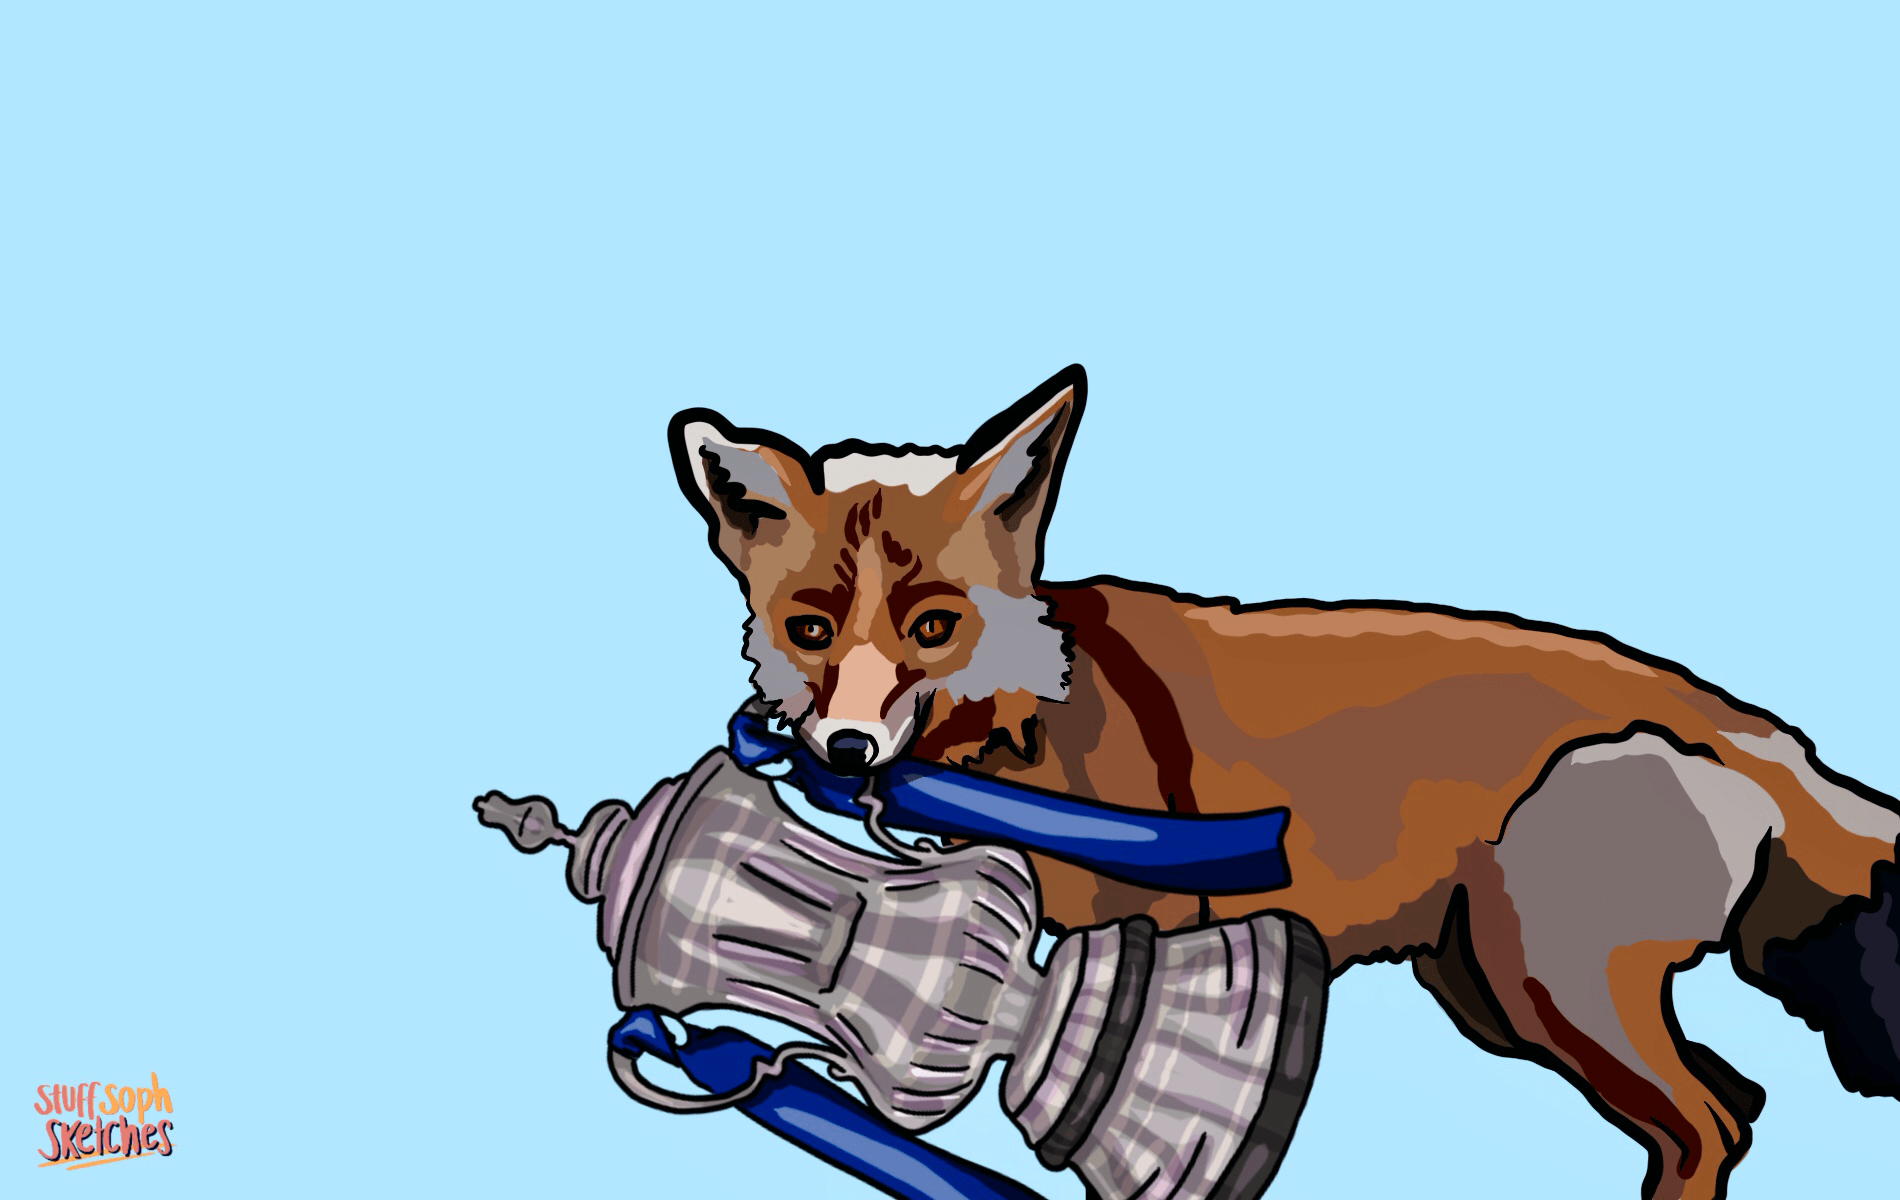 A fox holding the fa cup in its mouth